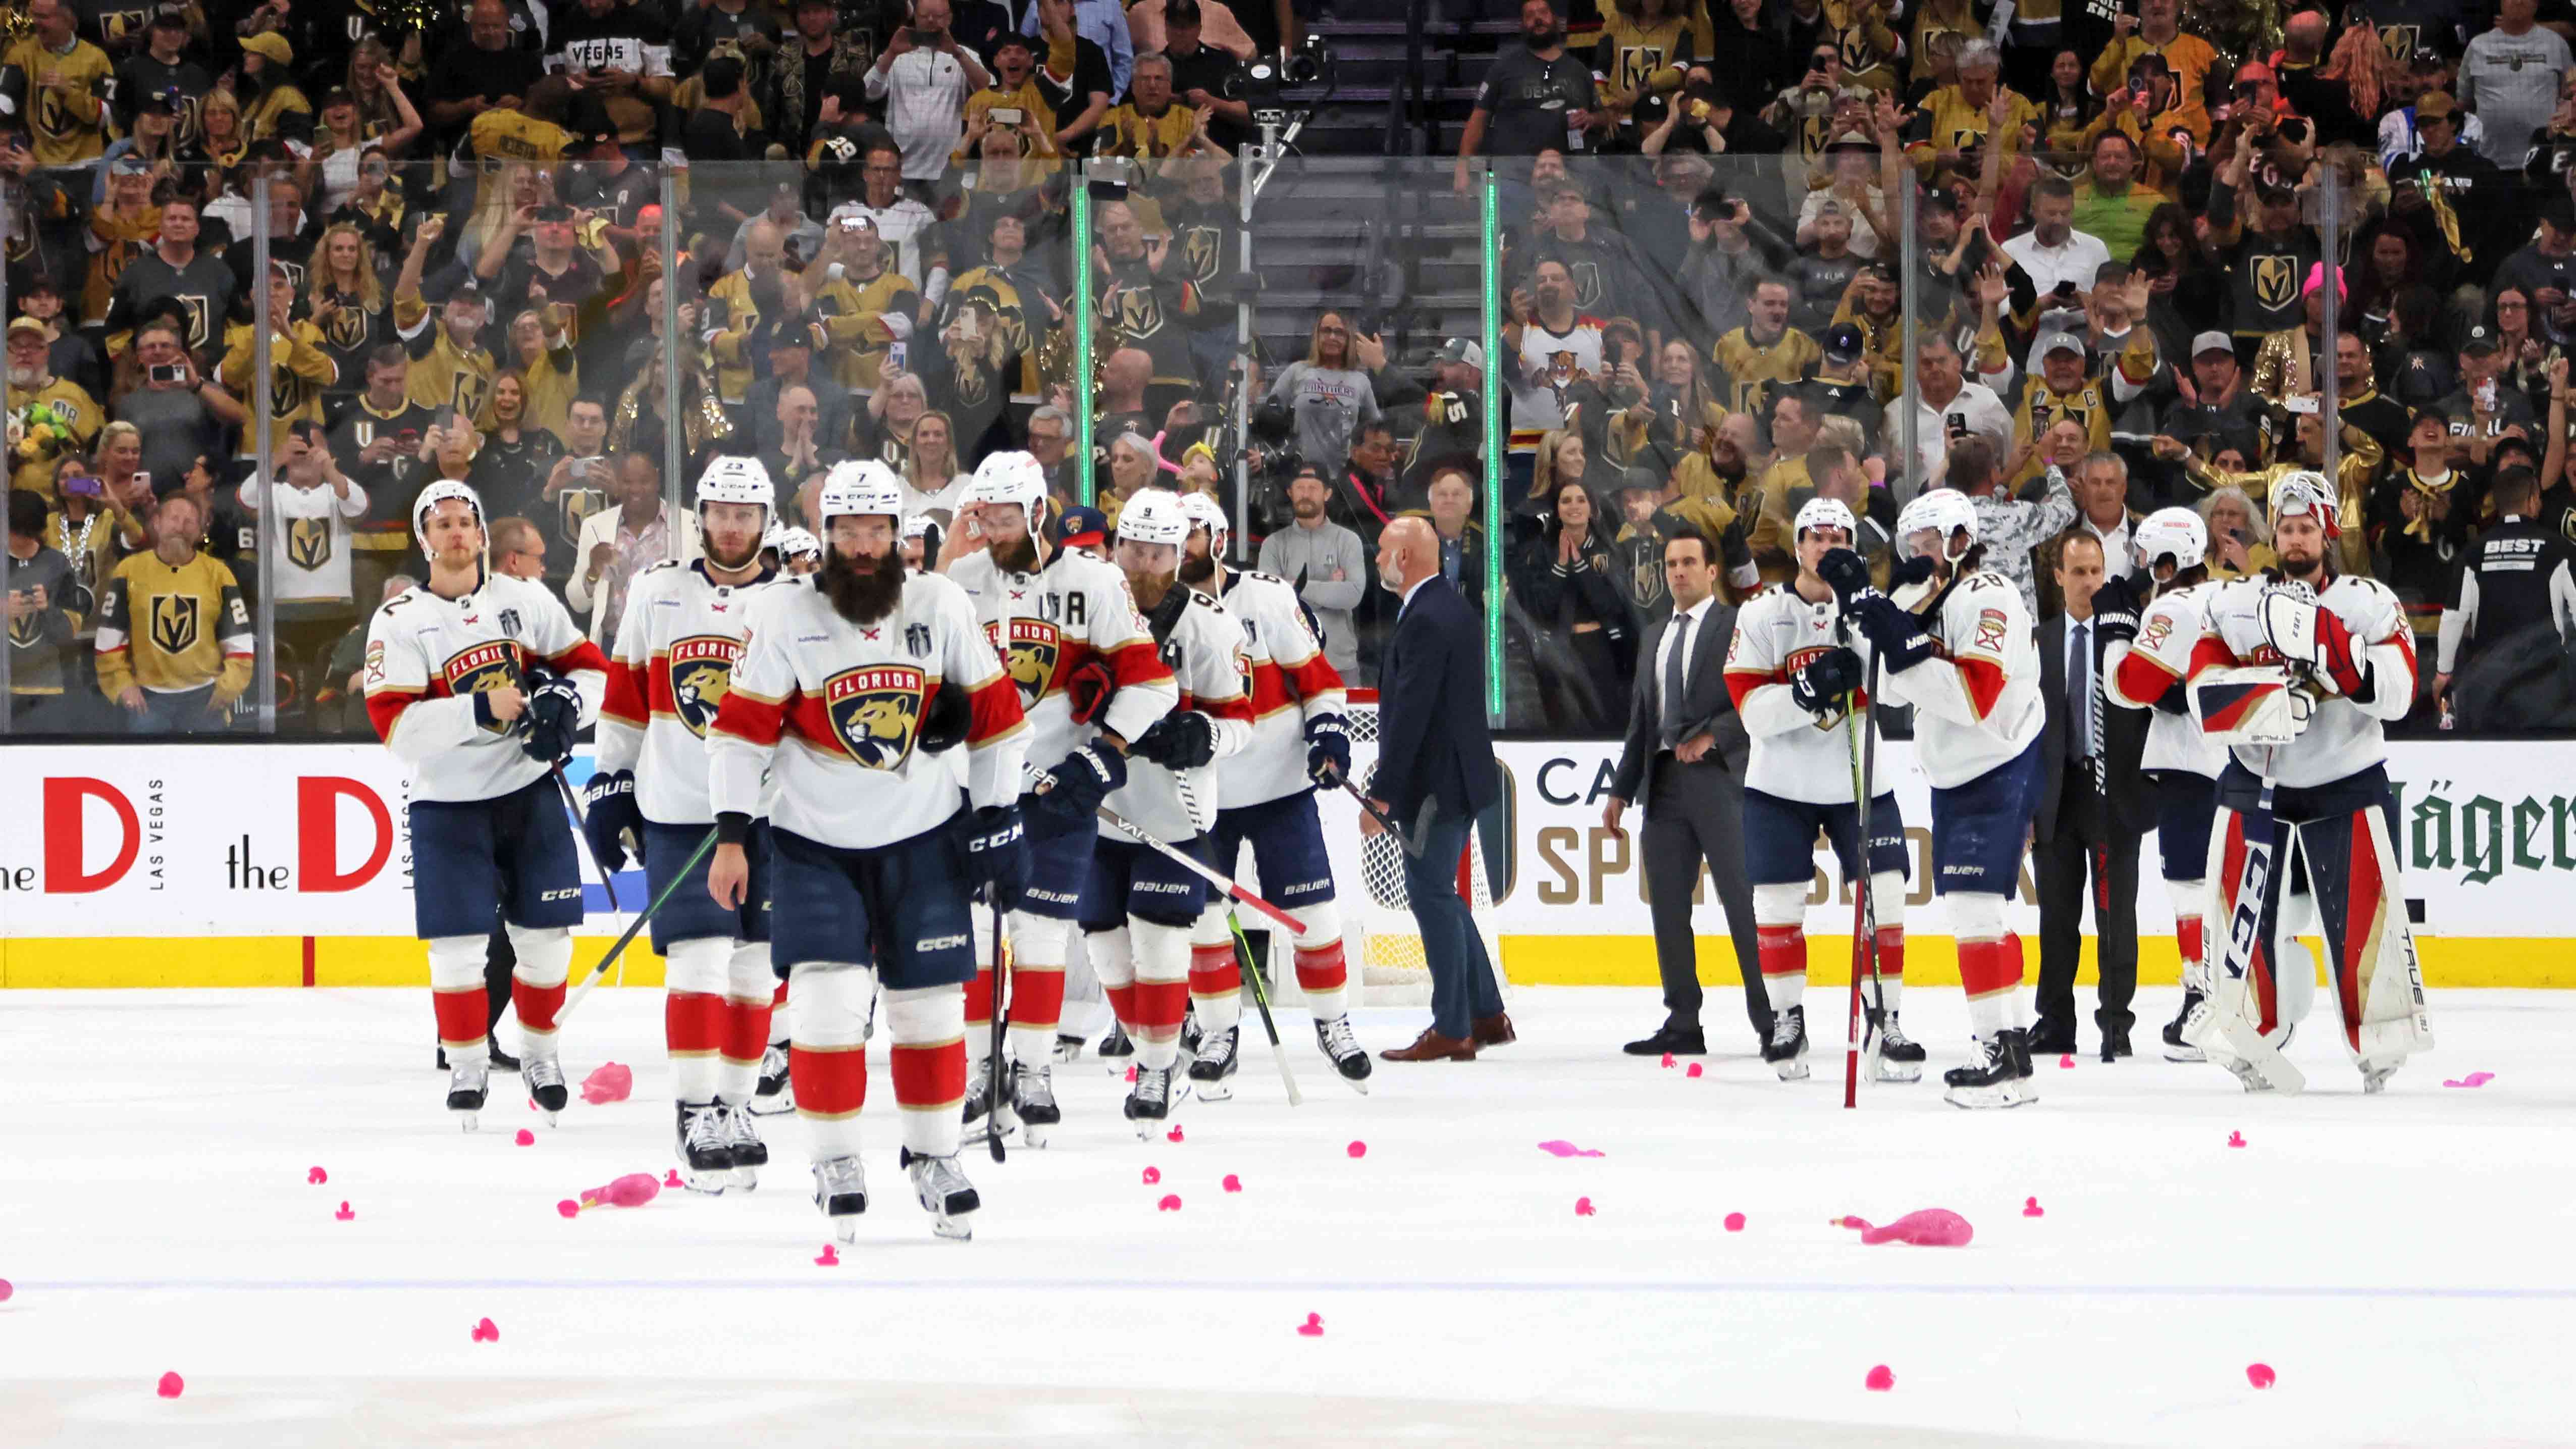 https://media.nbcnewyork.com/2023/09/web-230928-florida-panthers-stanley-cup-loss.jpg?quality=85&strip=all&fit=5103%2C2870